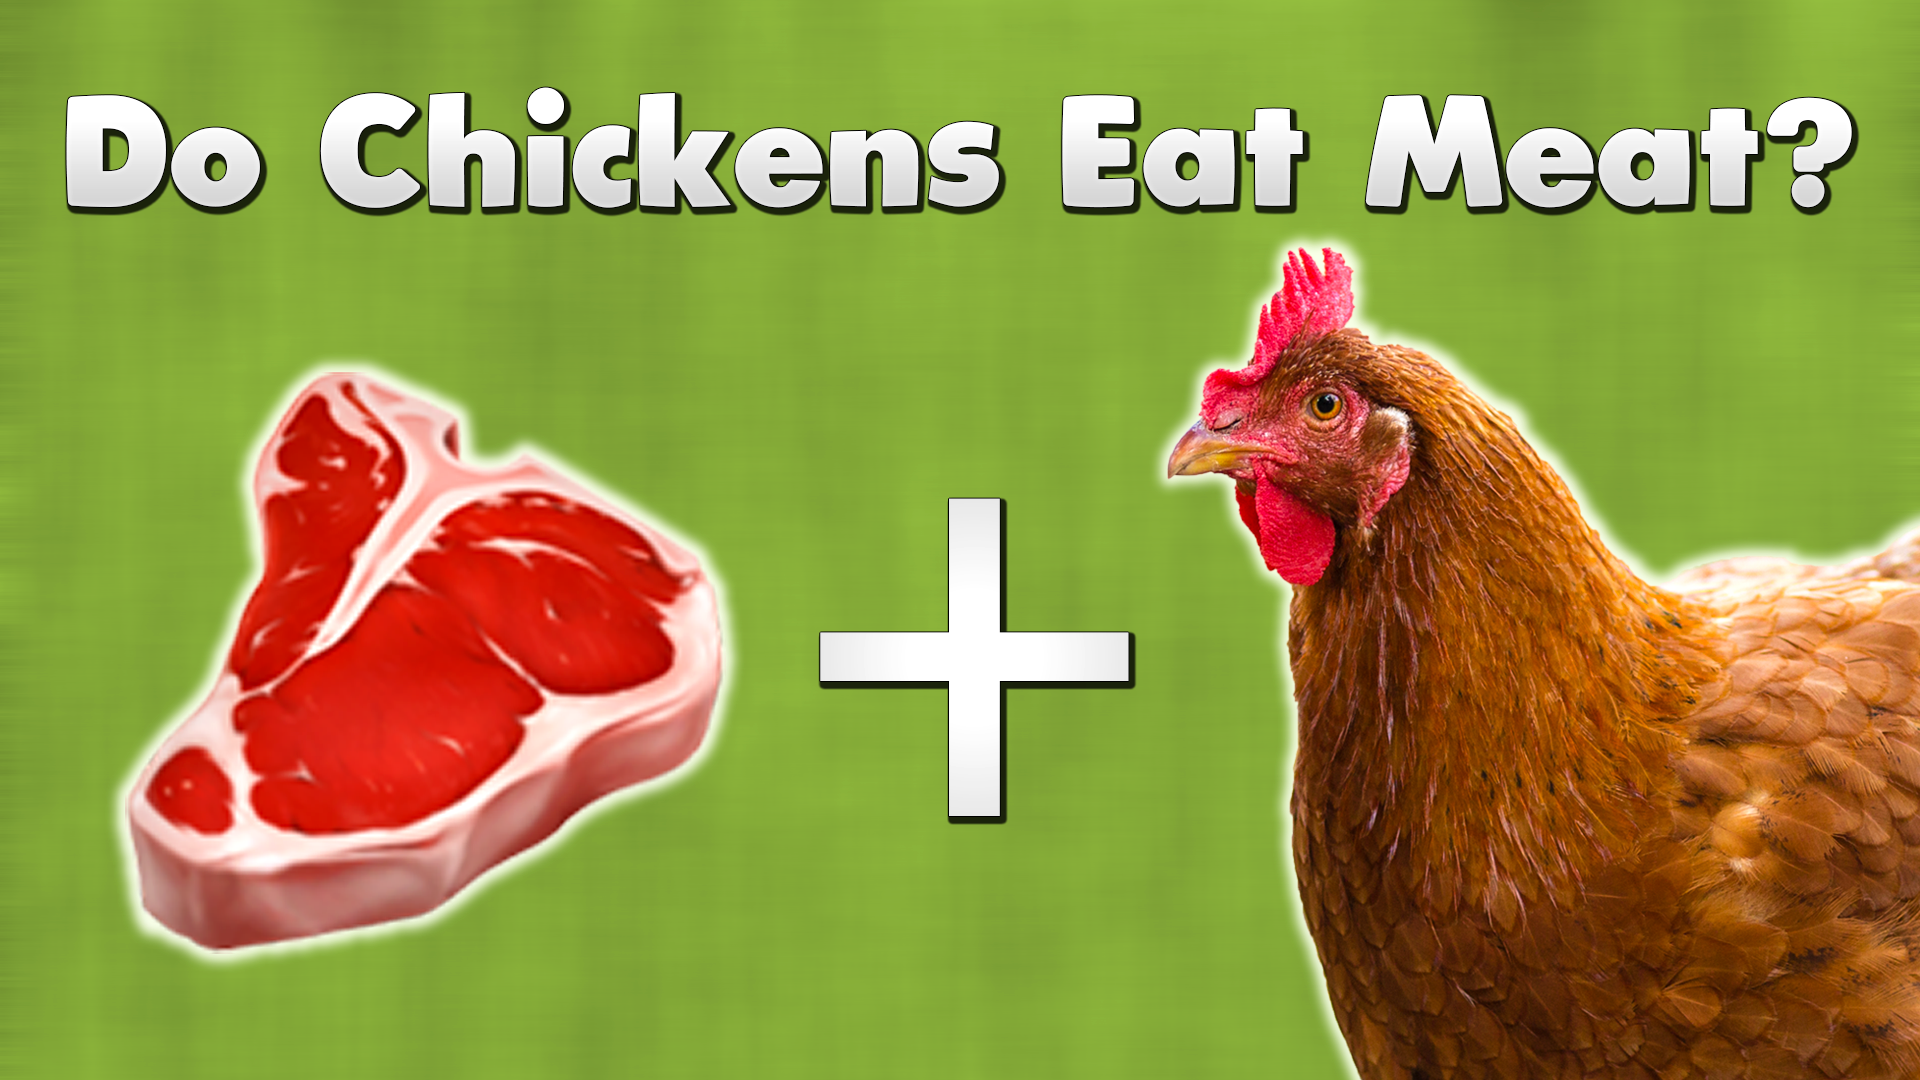 Do chickens eat meat?